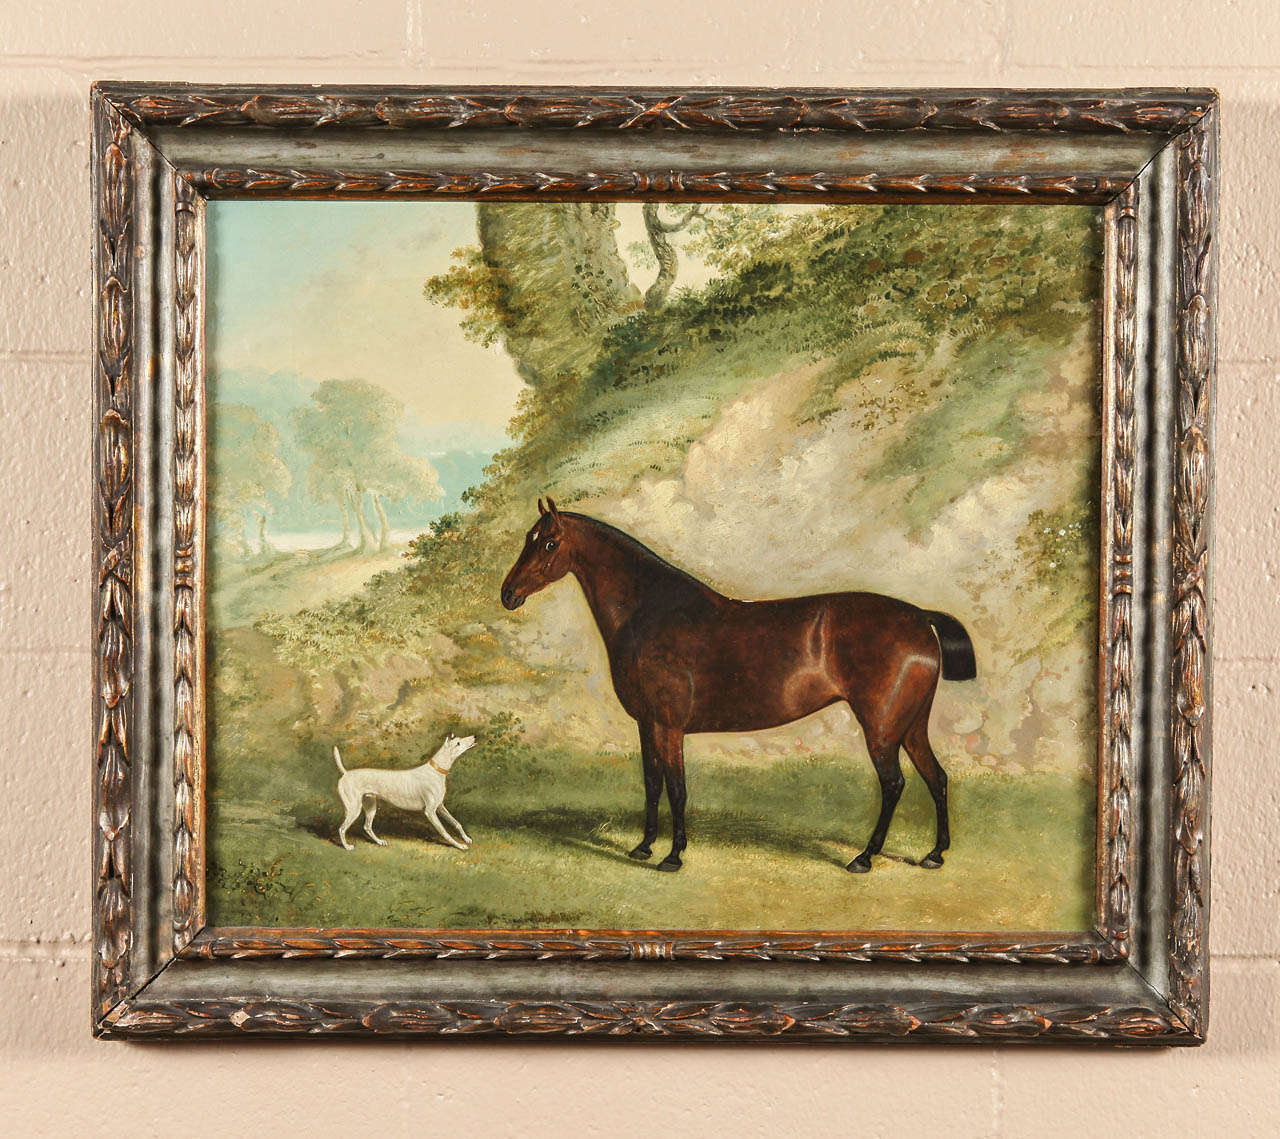 An English oil painting of a horse and dog in a romantic landscape. By John Ferneley, Sr. (1782-1860). He is considered one of the great equine artists, perhaps only second to Stubbs in terms of raw ability.